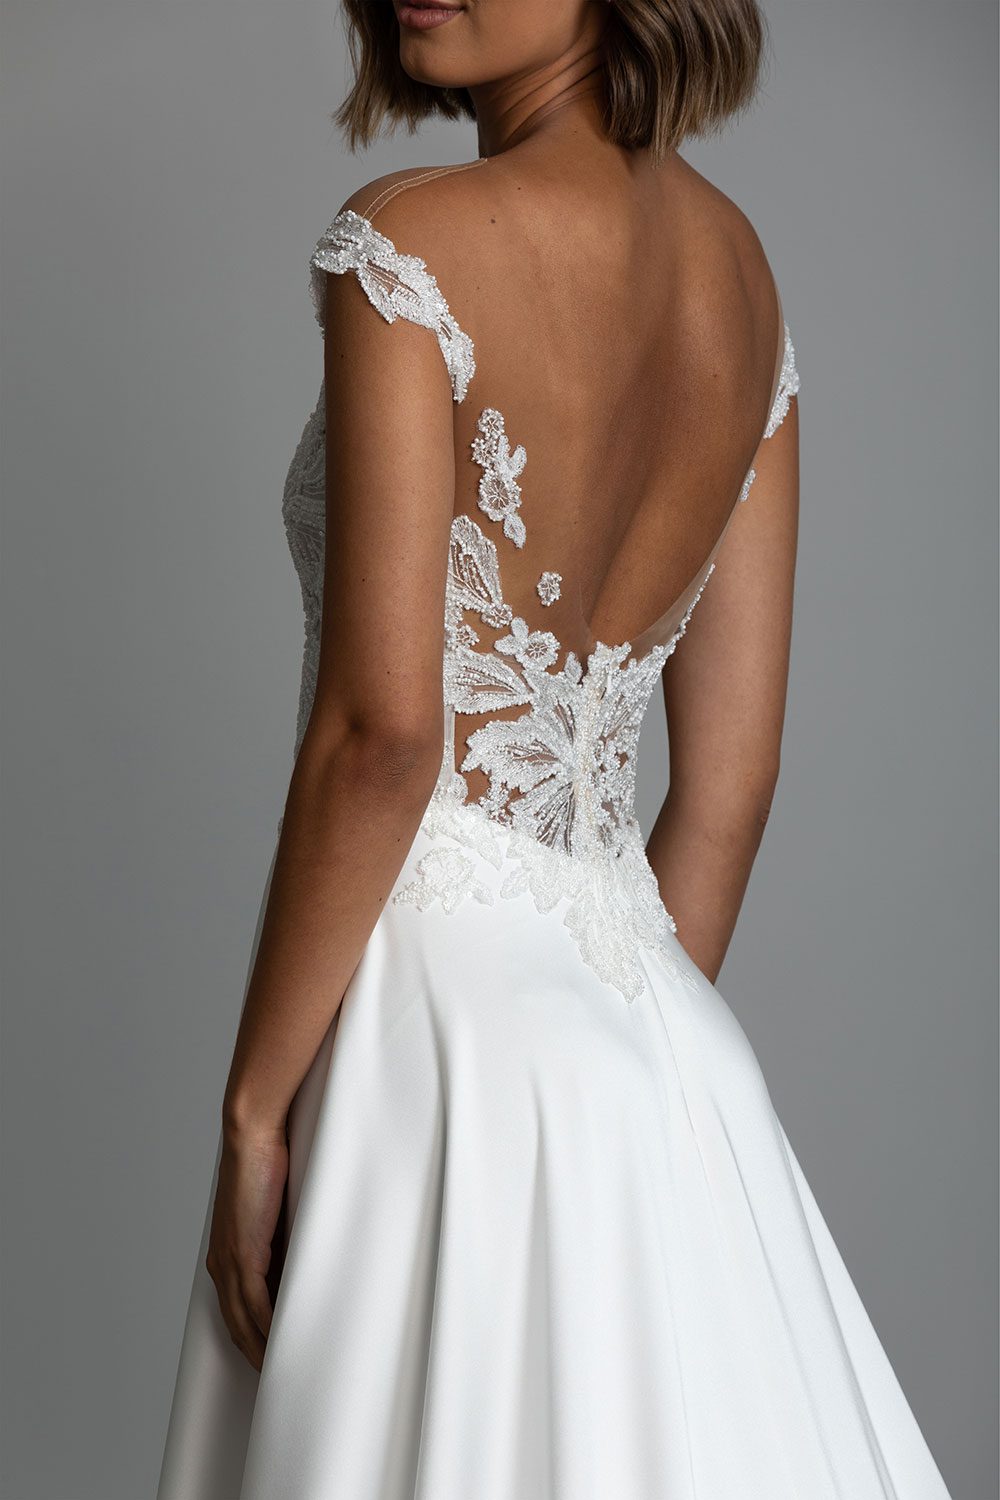 Charlotte Wedding Gown by Vinka Design - Featuring a delicate sweetheart neckline and off shoulder sleeves that draw the eye to the wearer’s décolletage. Botanical, intricately beaded, embroidered lace graces the fitted, boned bodice and trails off the shoulder into a low back on a nude, illusion tulle base. Close up of back of model wearing off shoulder sleeves of beaded botanical lace and sweetheart neckline with A-line skirt and cascading train